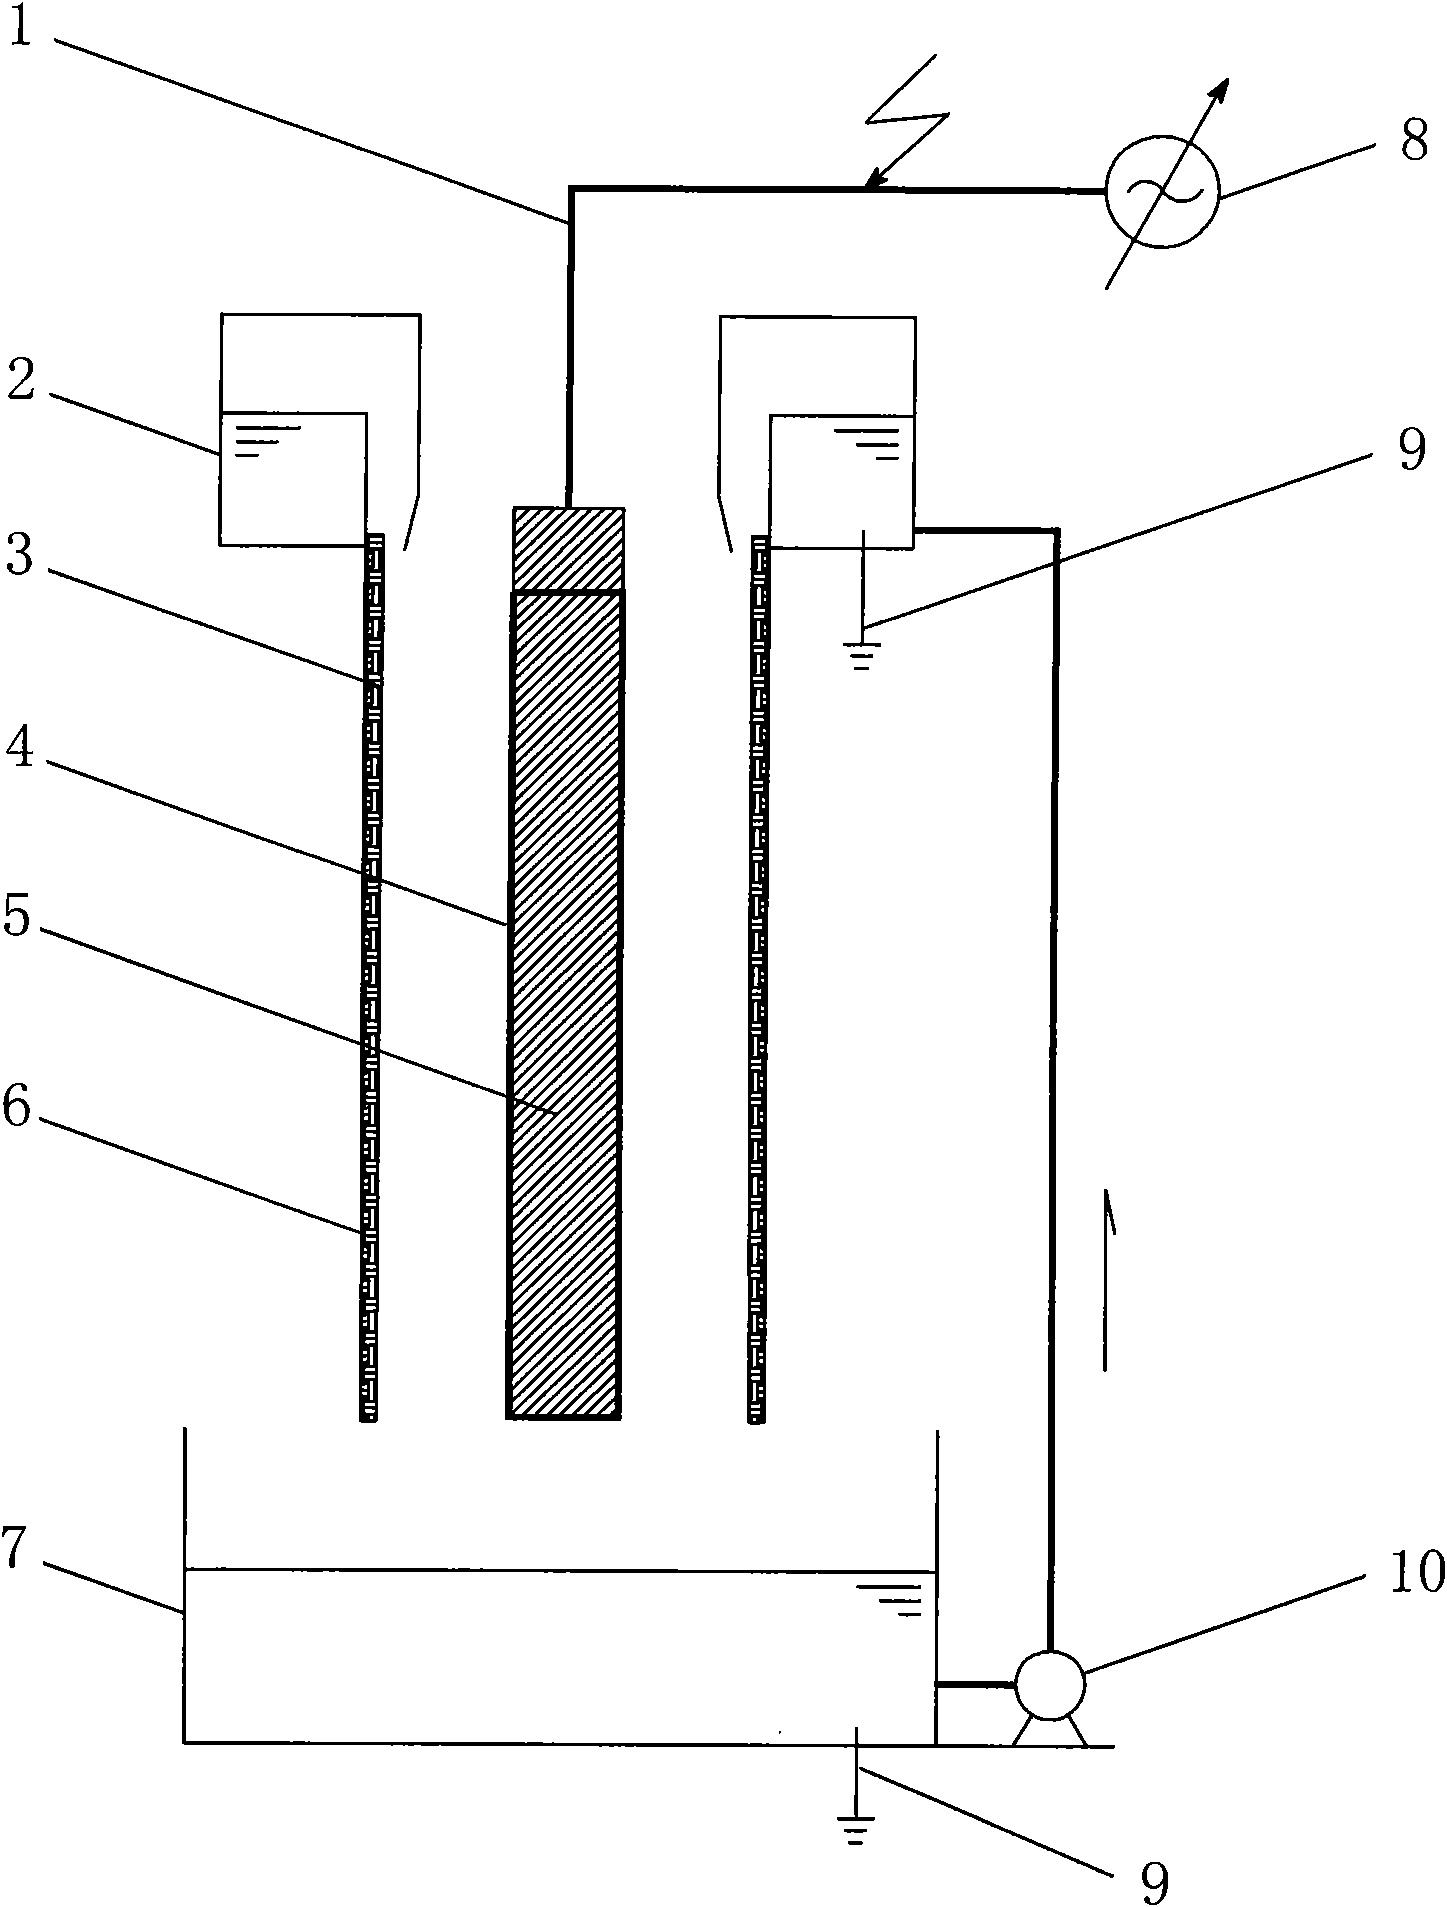 Dielectric barrier discharge plasma, adsorption and photocatalysis synergy waste water treatment device